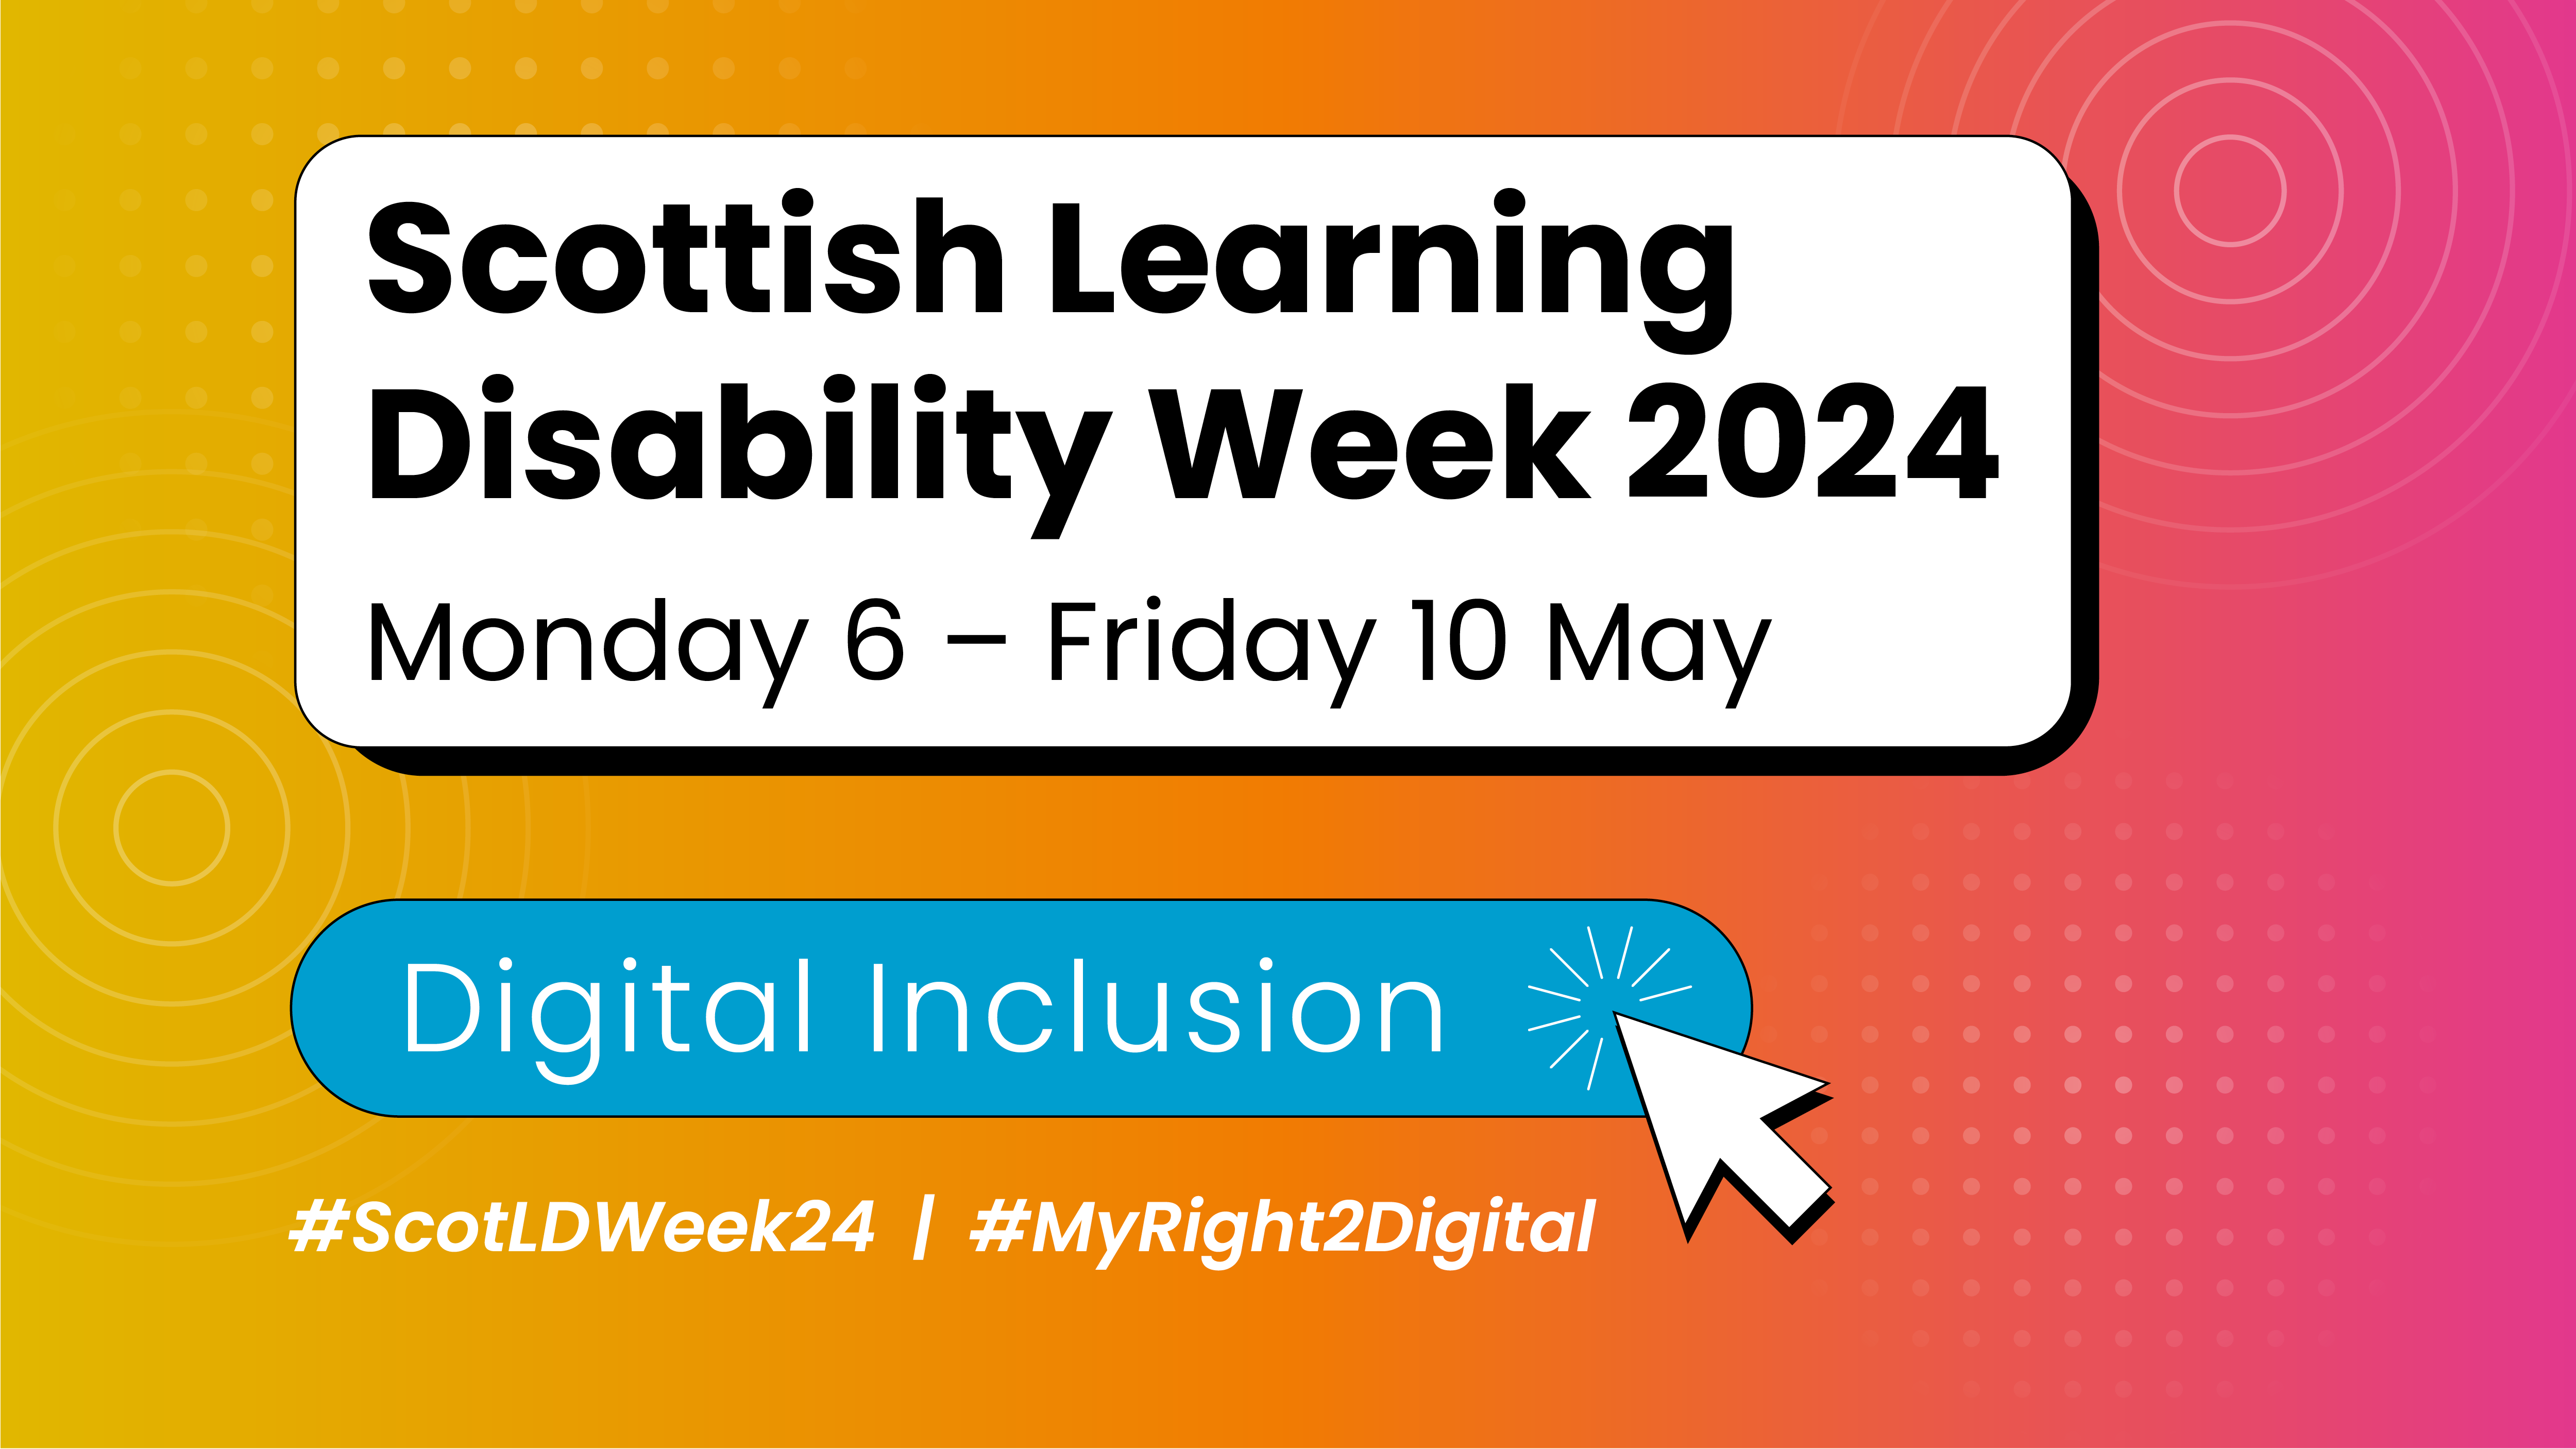 Featured image for “Scottish Learning Disability Week 2024”